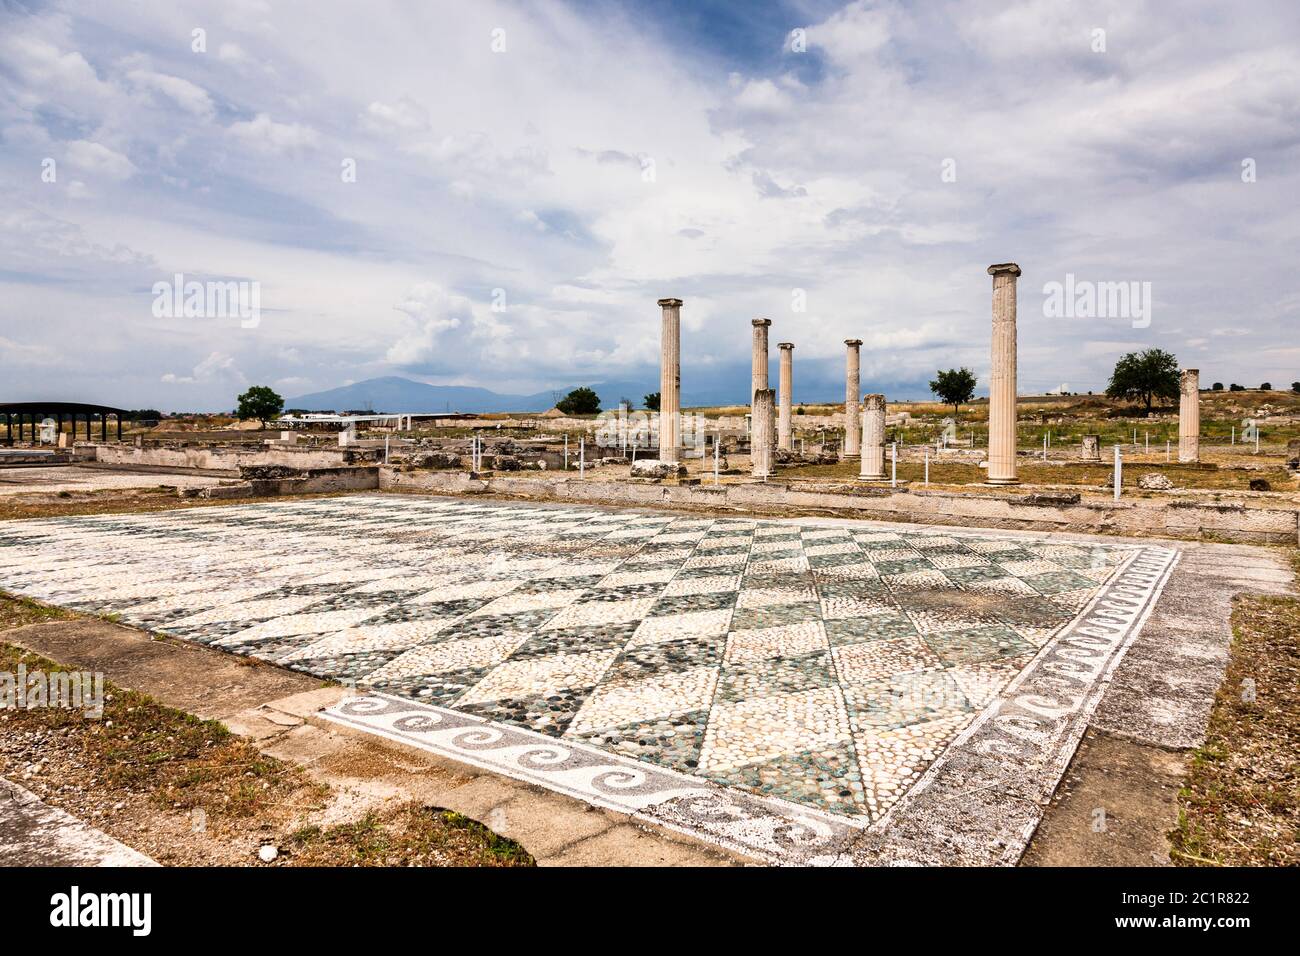 Atrium with mosaic, Archaelogical Site of Pella, Ancient capital of Macedon, Birthplace of Alexander the Great, Pella, Central Macedonia,Greece,Europe Stock Photo